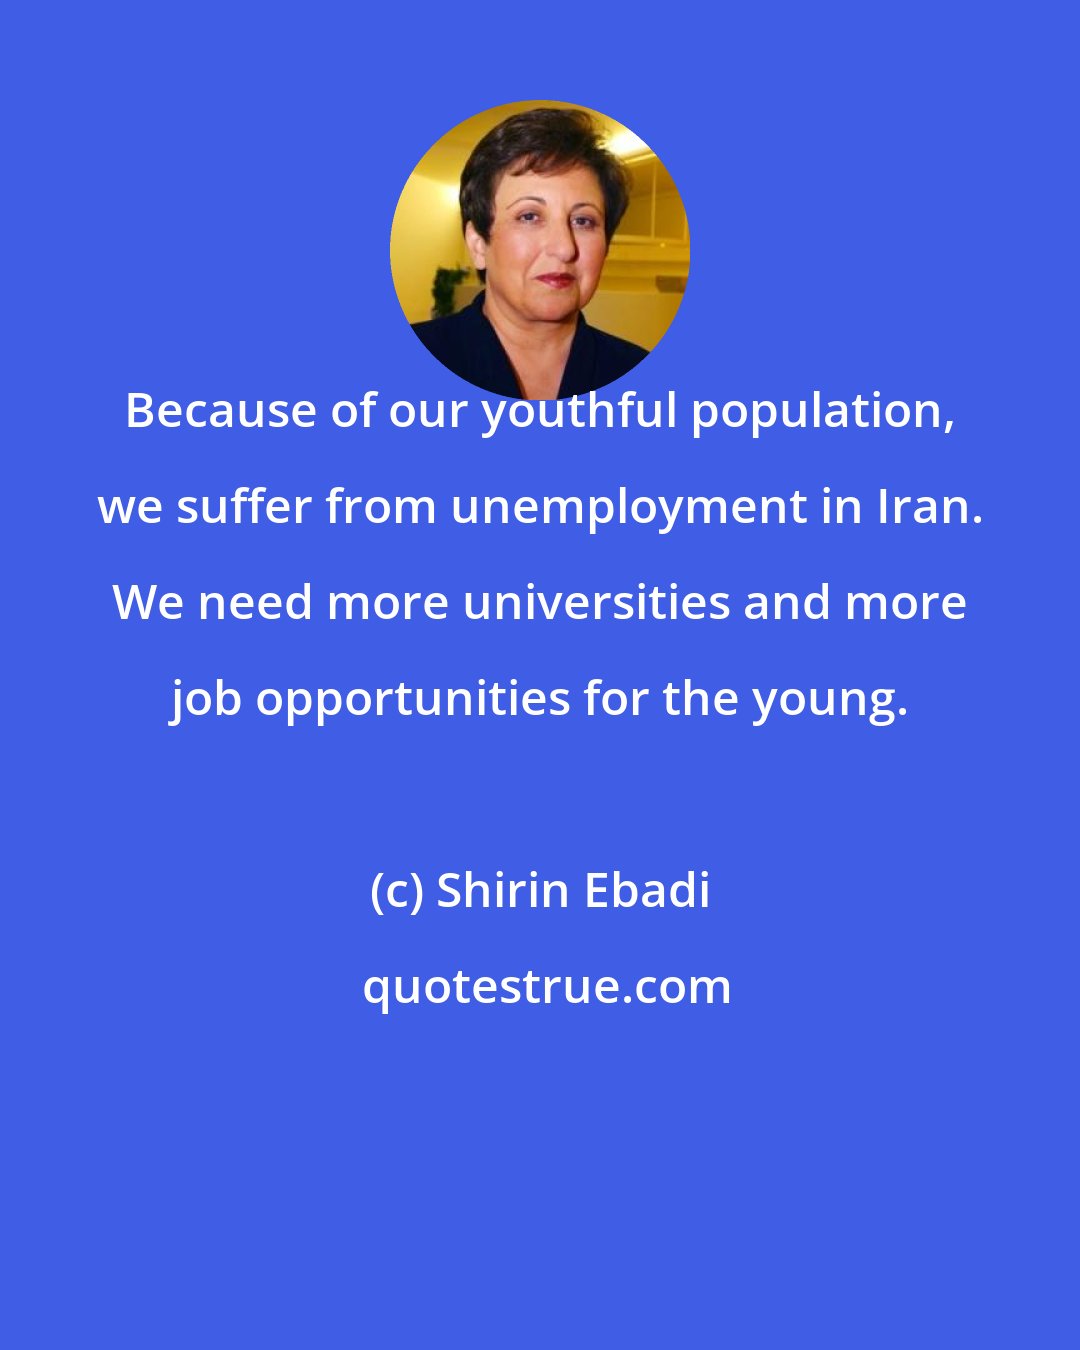 Shirin Ebadi: Because of our youthful population, we suffer from unemployment in Iran. We need more universities and more job opportunities for the young.